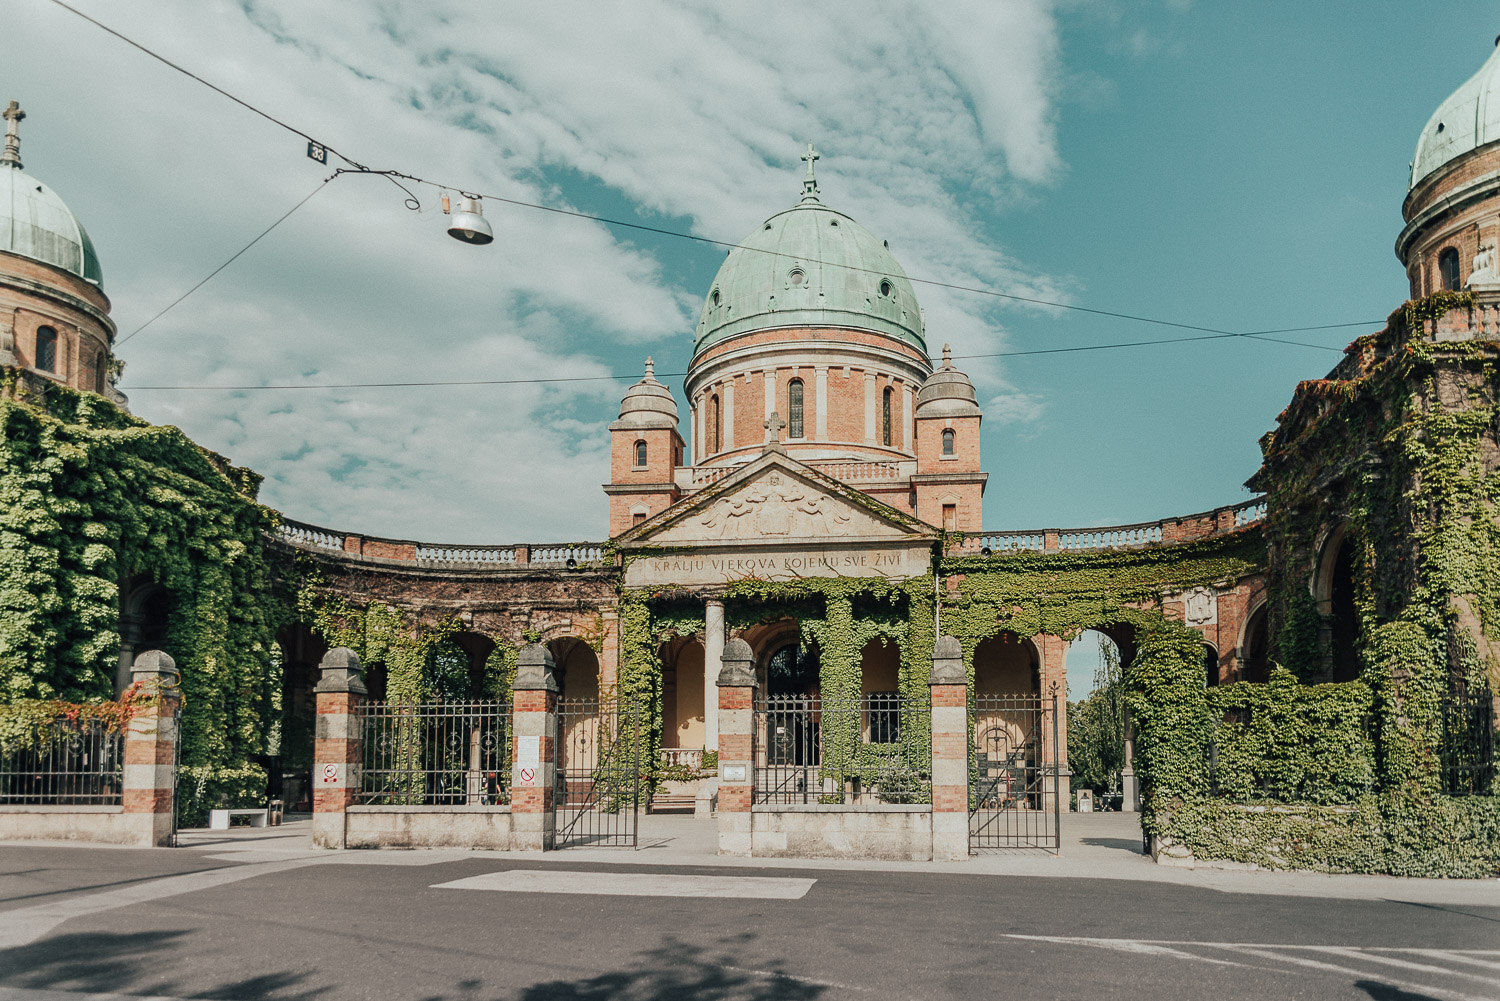 Things to do in Zagreb: See the stunning Mirogoj Cemetery